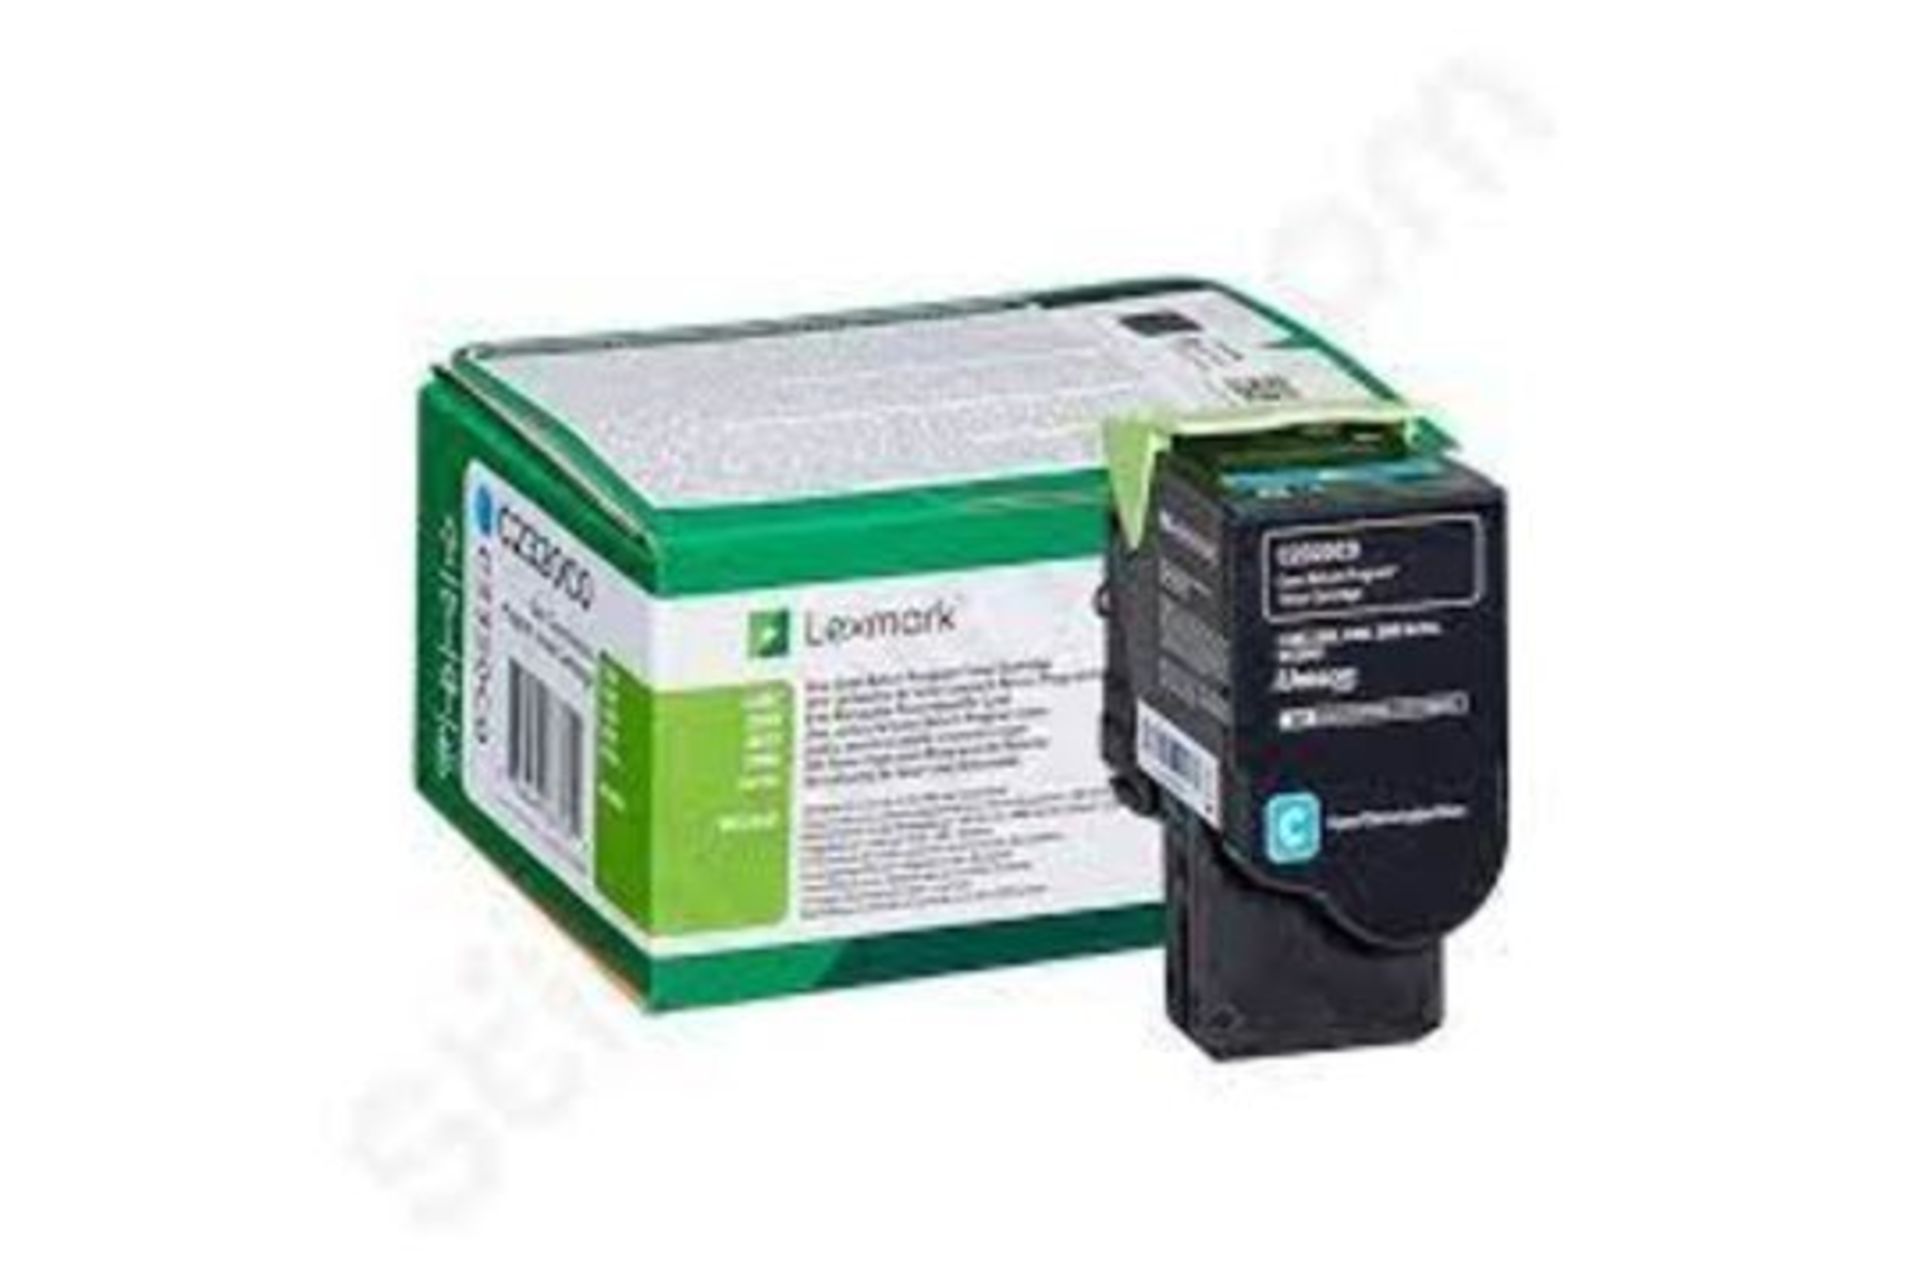 MAJOR LIQUIDATION OF CIRCA 16000 PRINTER CARTRIDGES/TONERS COMPATIBLE WITH BROTHER, EPSON, HP, CANON - Image 6 of 9